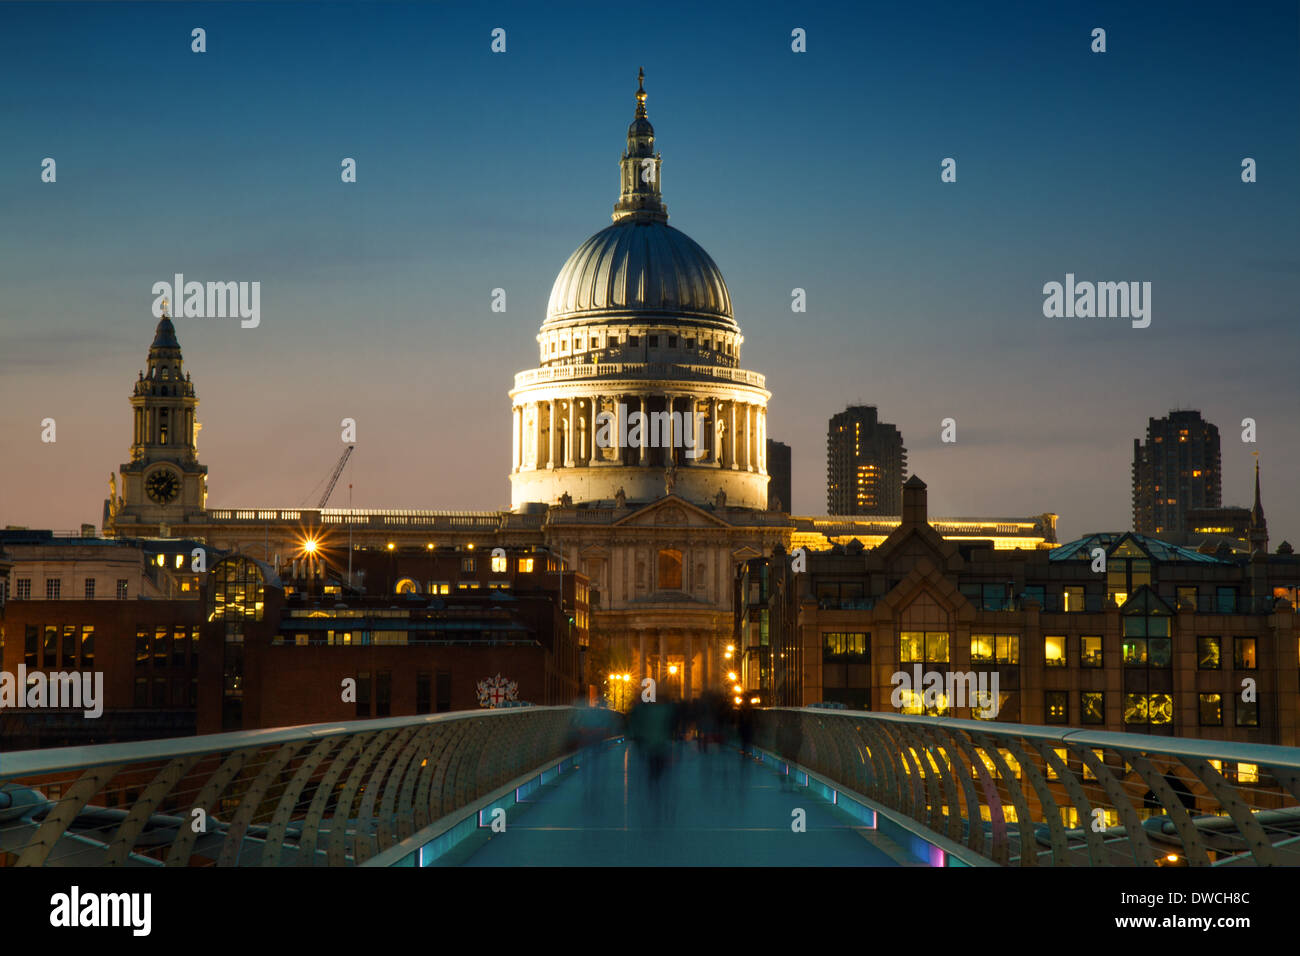 St. Paul's cathedral at twilight, London, England Stock Photo